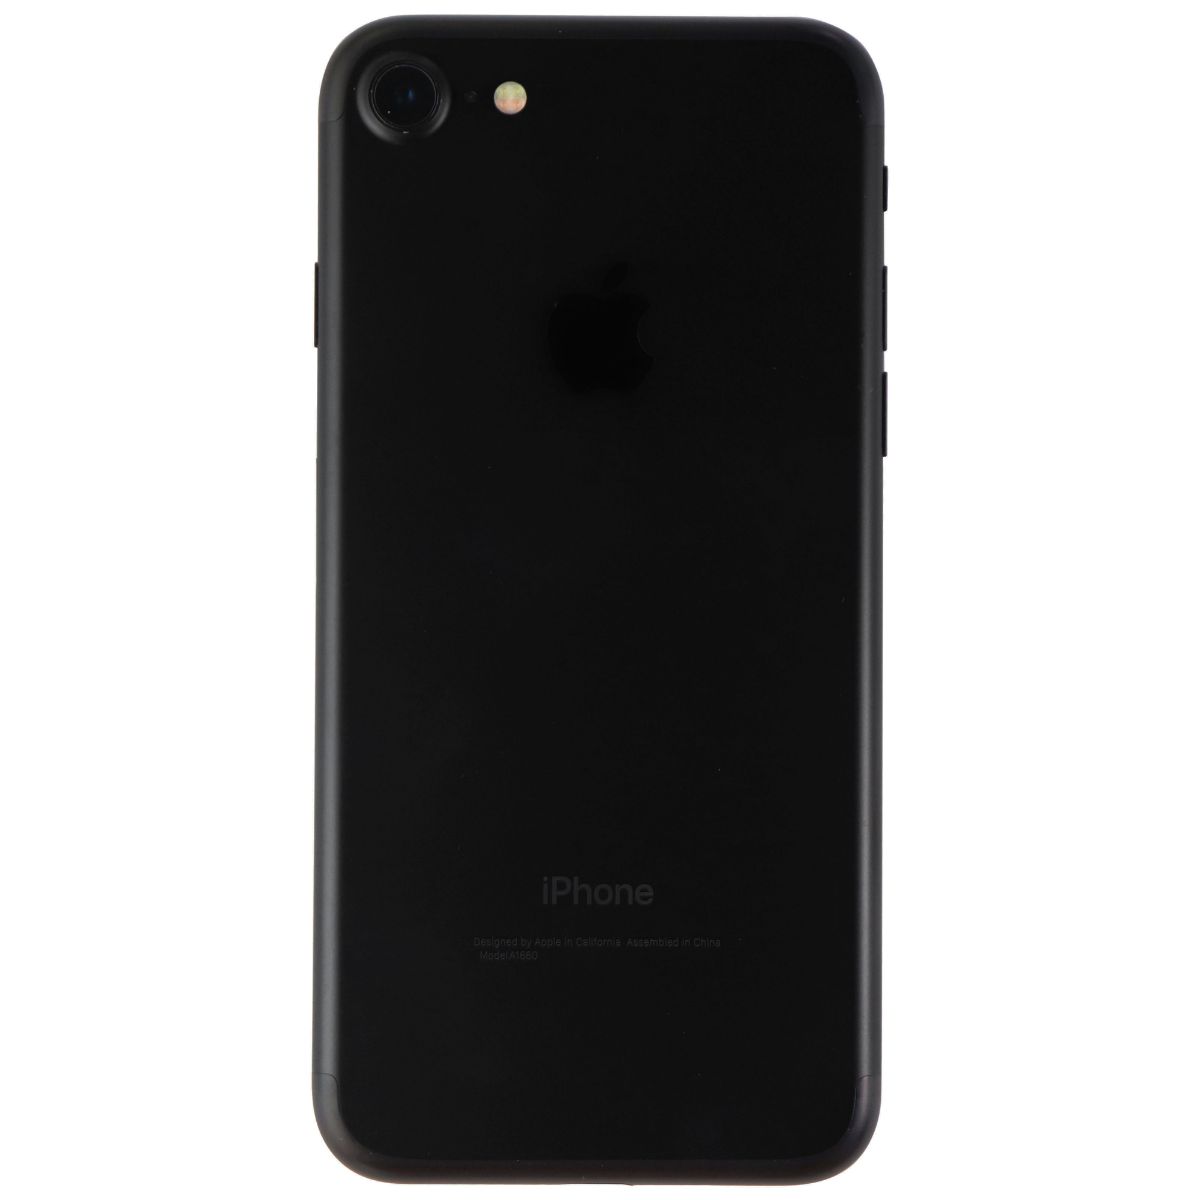 Apple iPhone 7 (4.7-inch) Smartphone (A1660) T-Mobile Only - 32GB / Jet Black Cell Phones & Smartphones Apple    - Simple Cell Bulk Wholesale Pricing - USA Seller